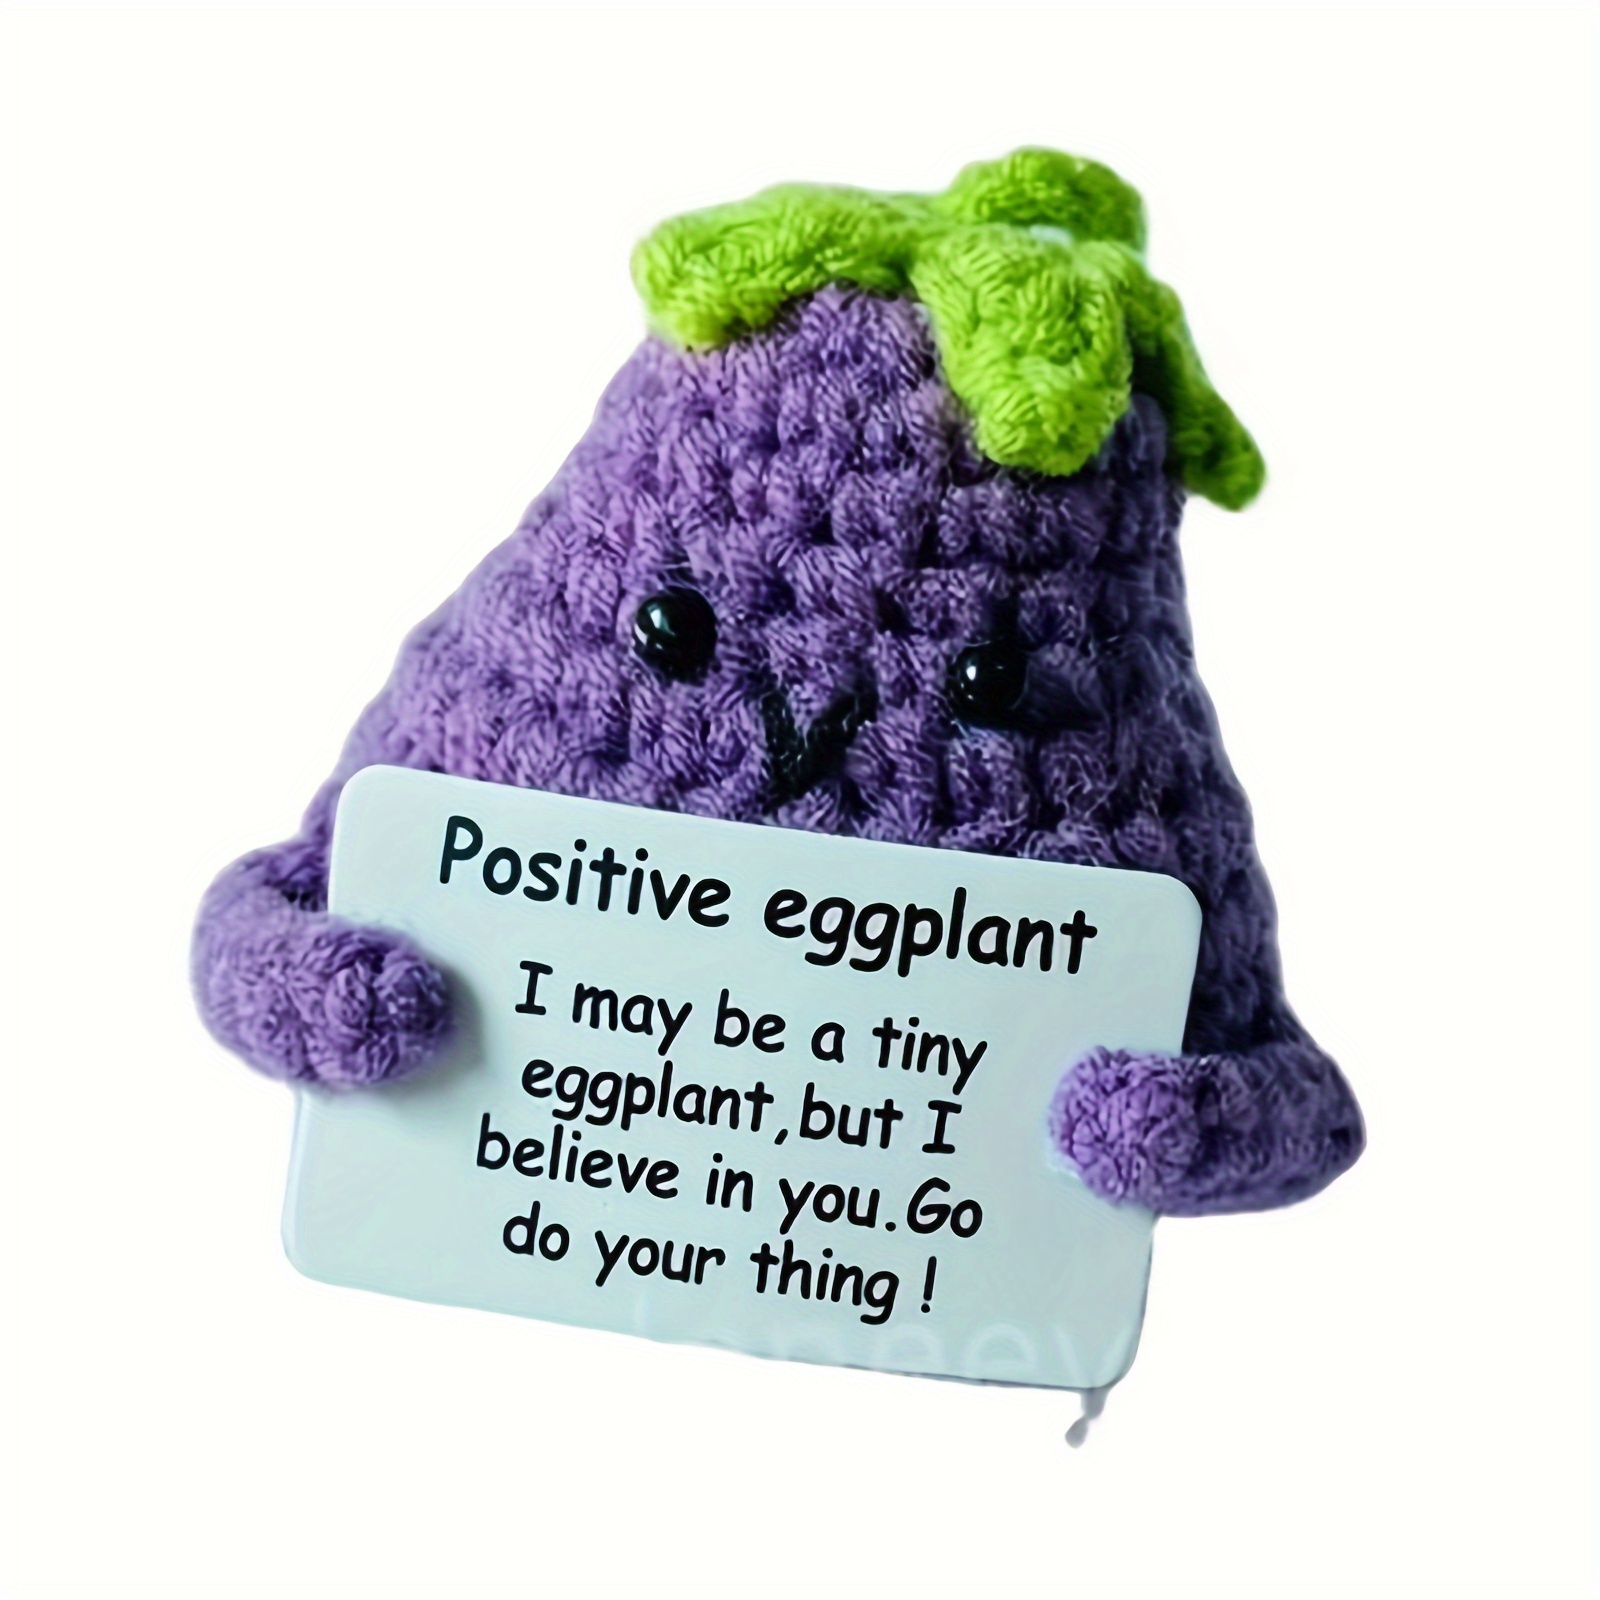 2-Pack: Funny Positive Potato Cute Wool Knitting Doll